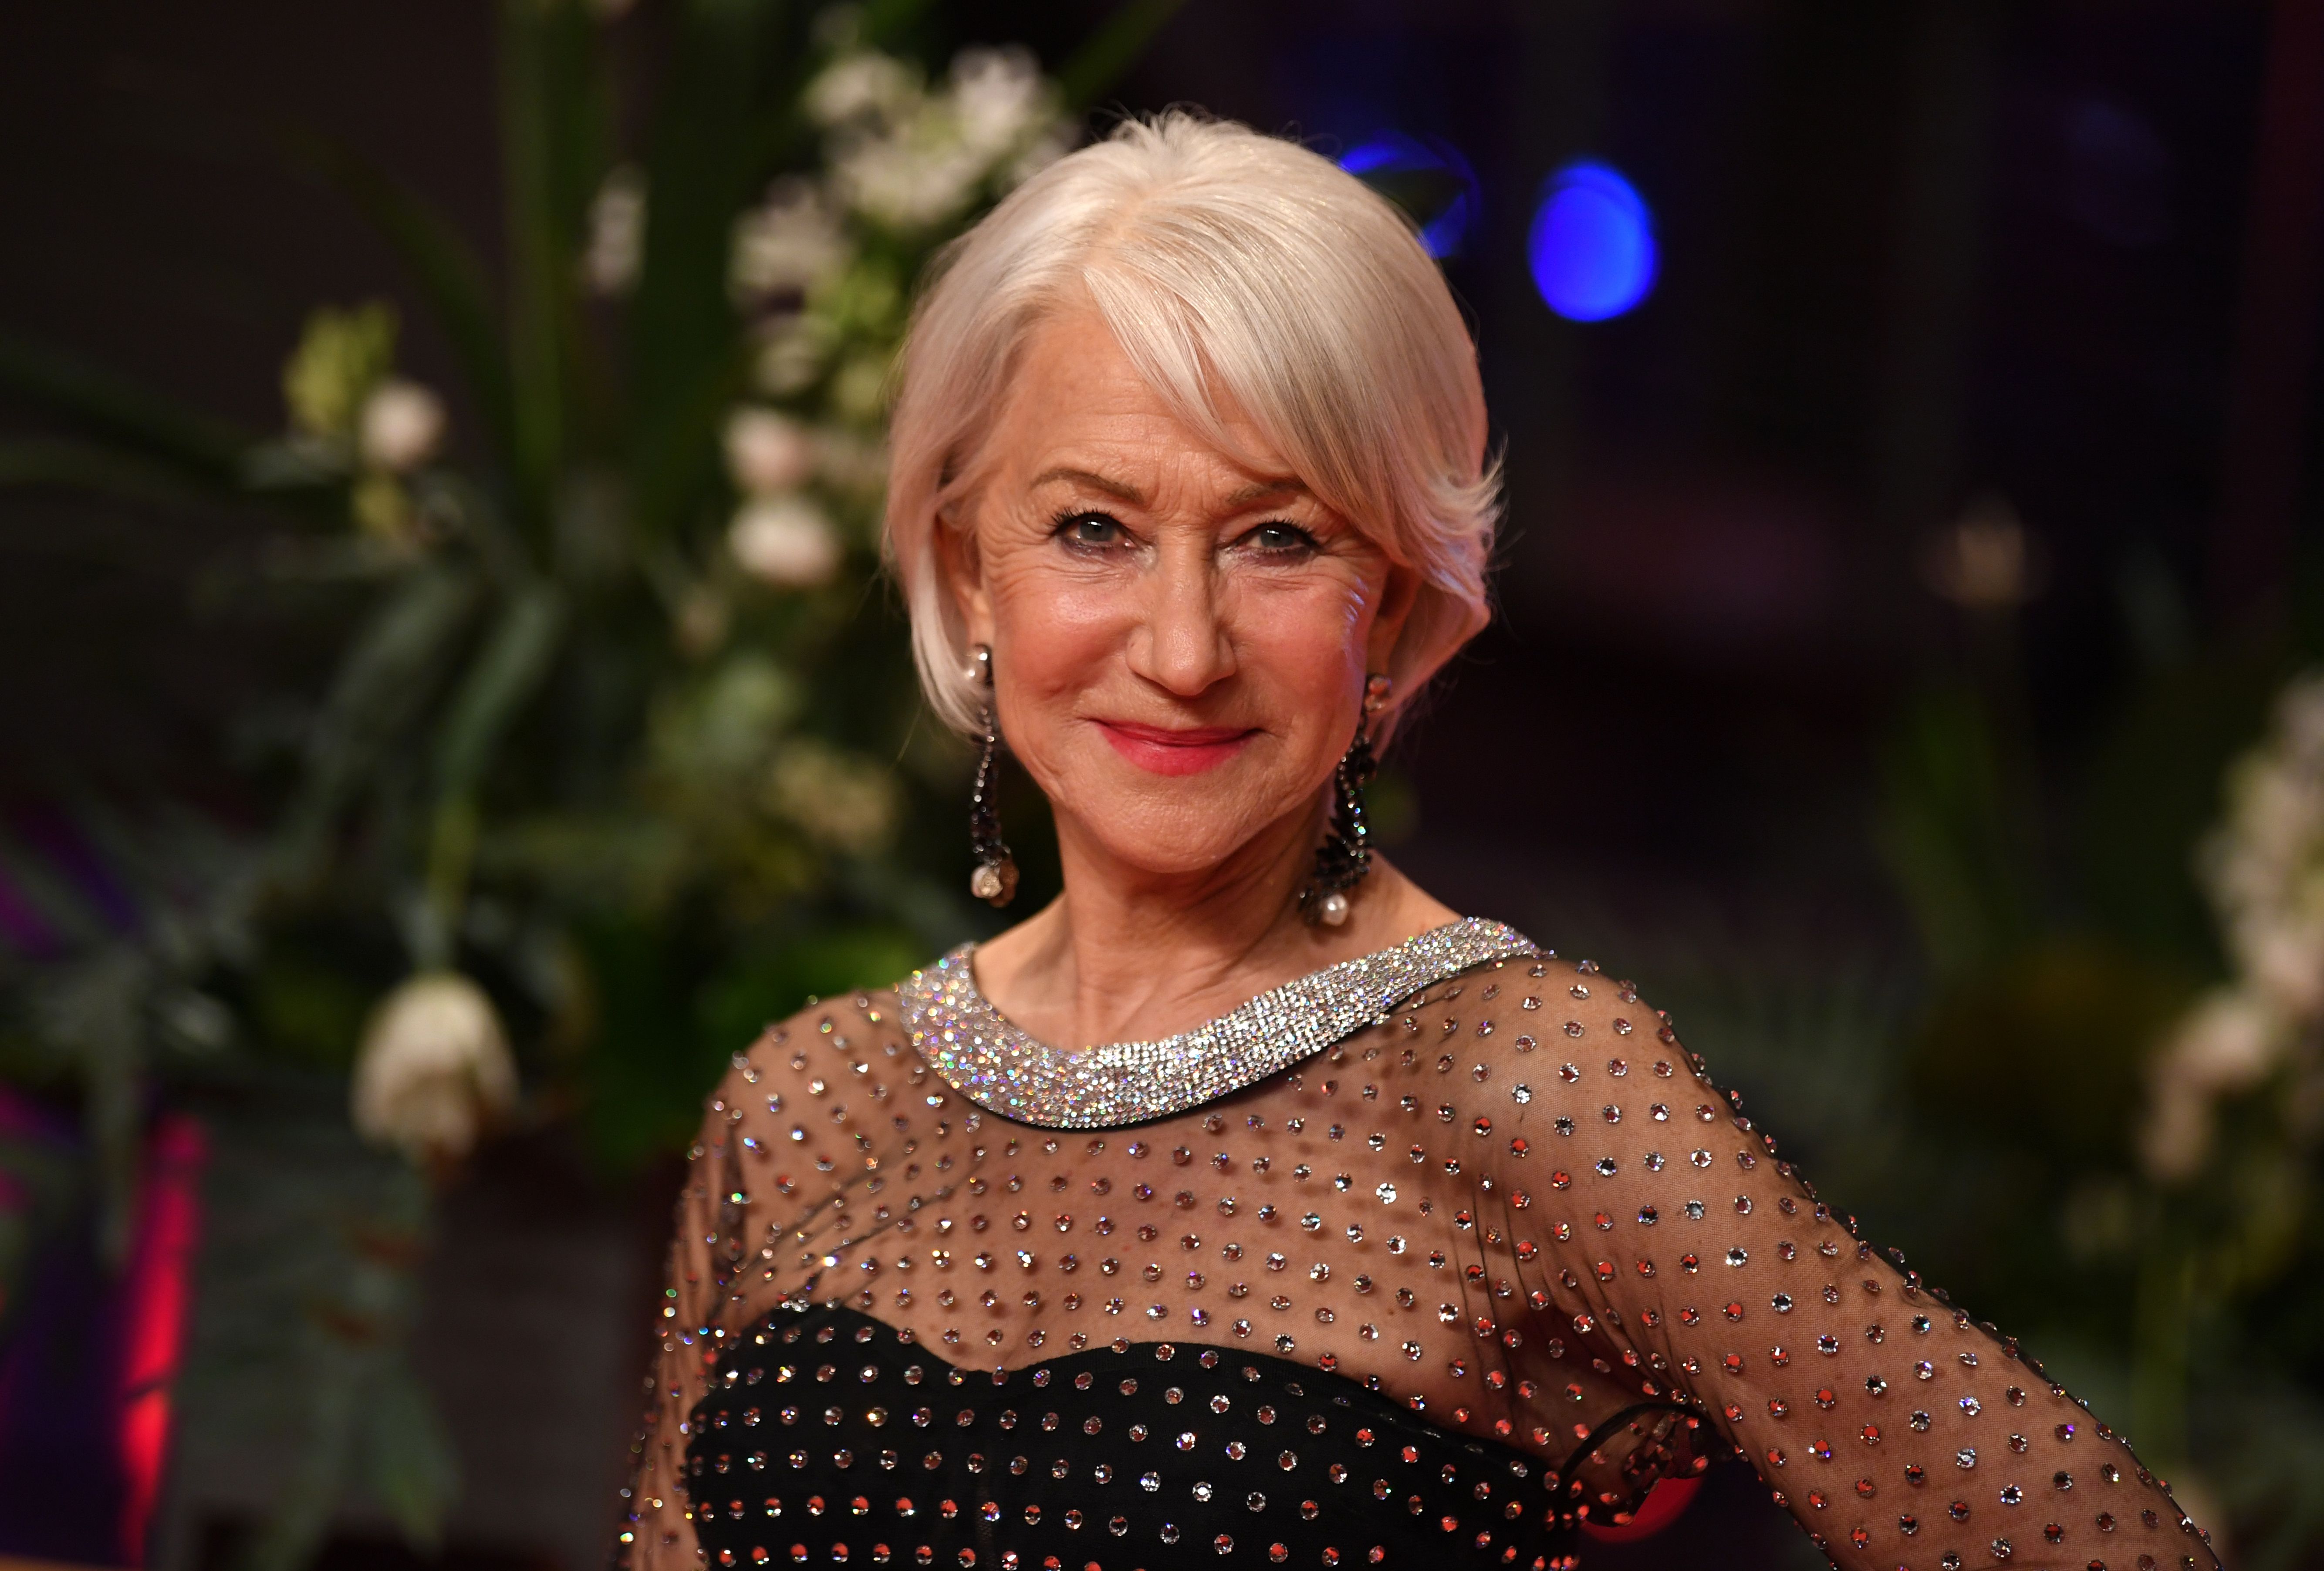 Helen Mirren at The International Film Festival on February 27, 2020 | Source: Getty Images